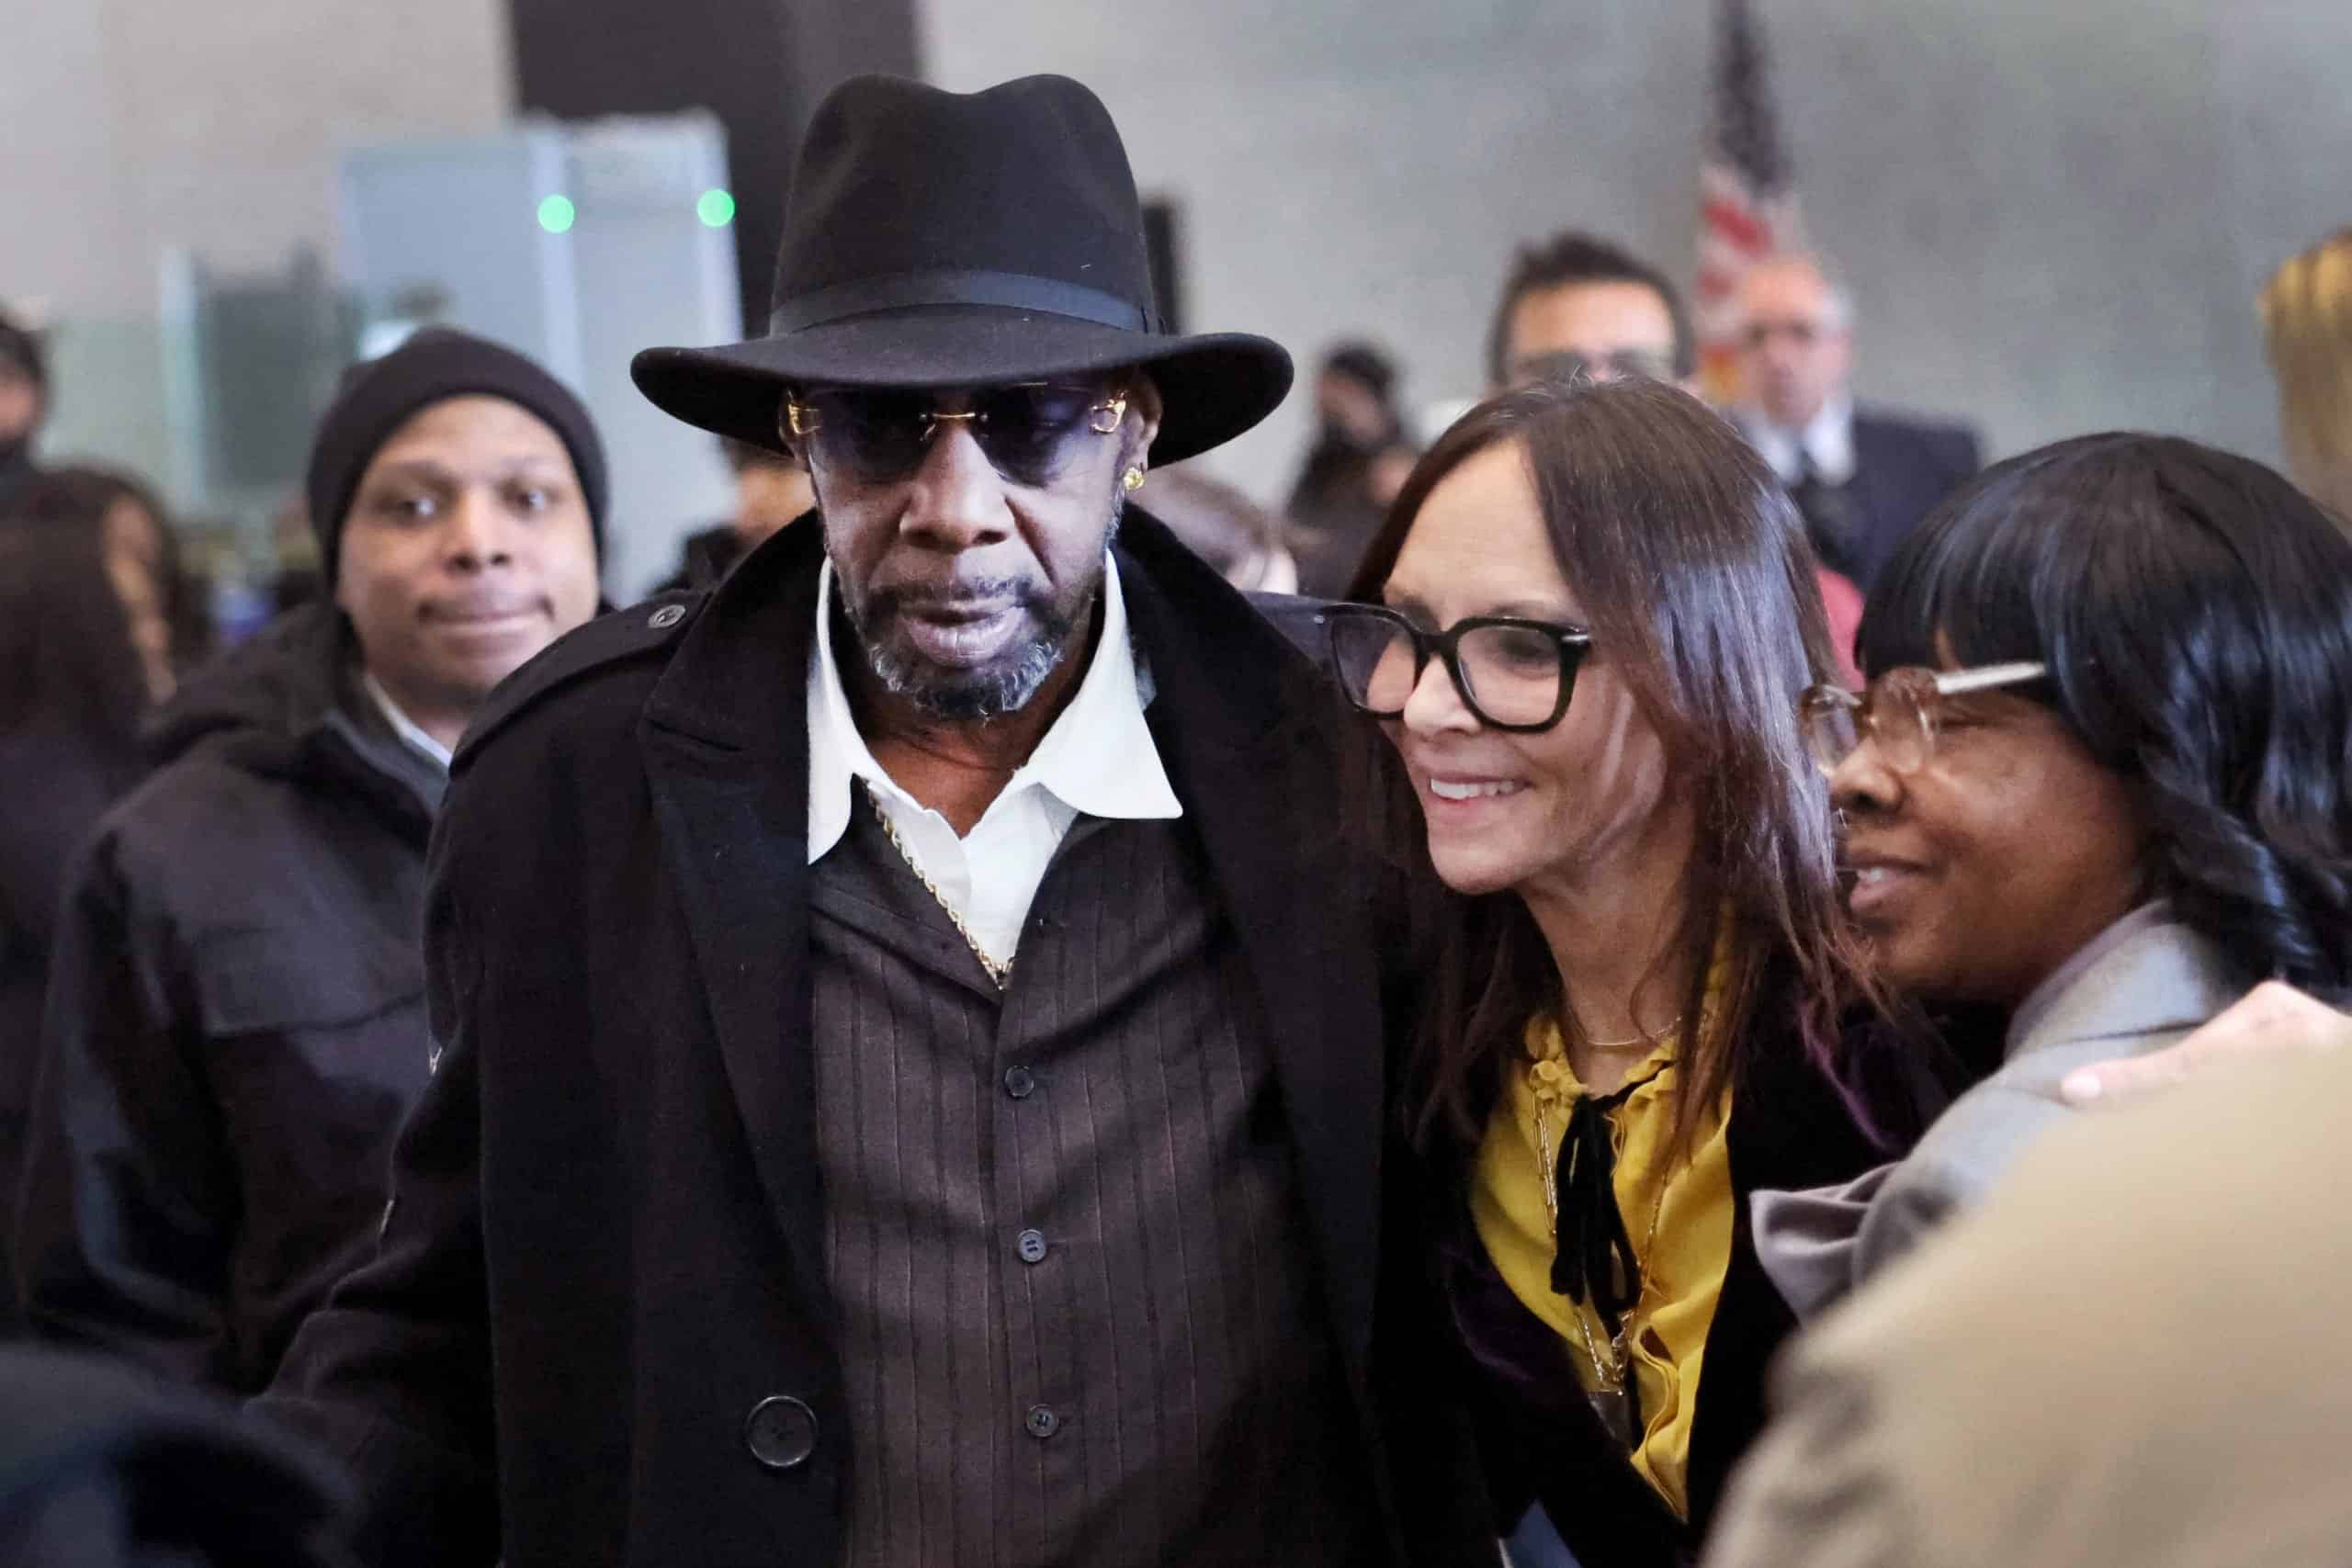 R. Kelly Sentenced In Chicago Federal Court After September Conviction